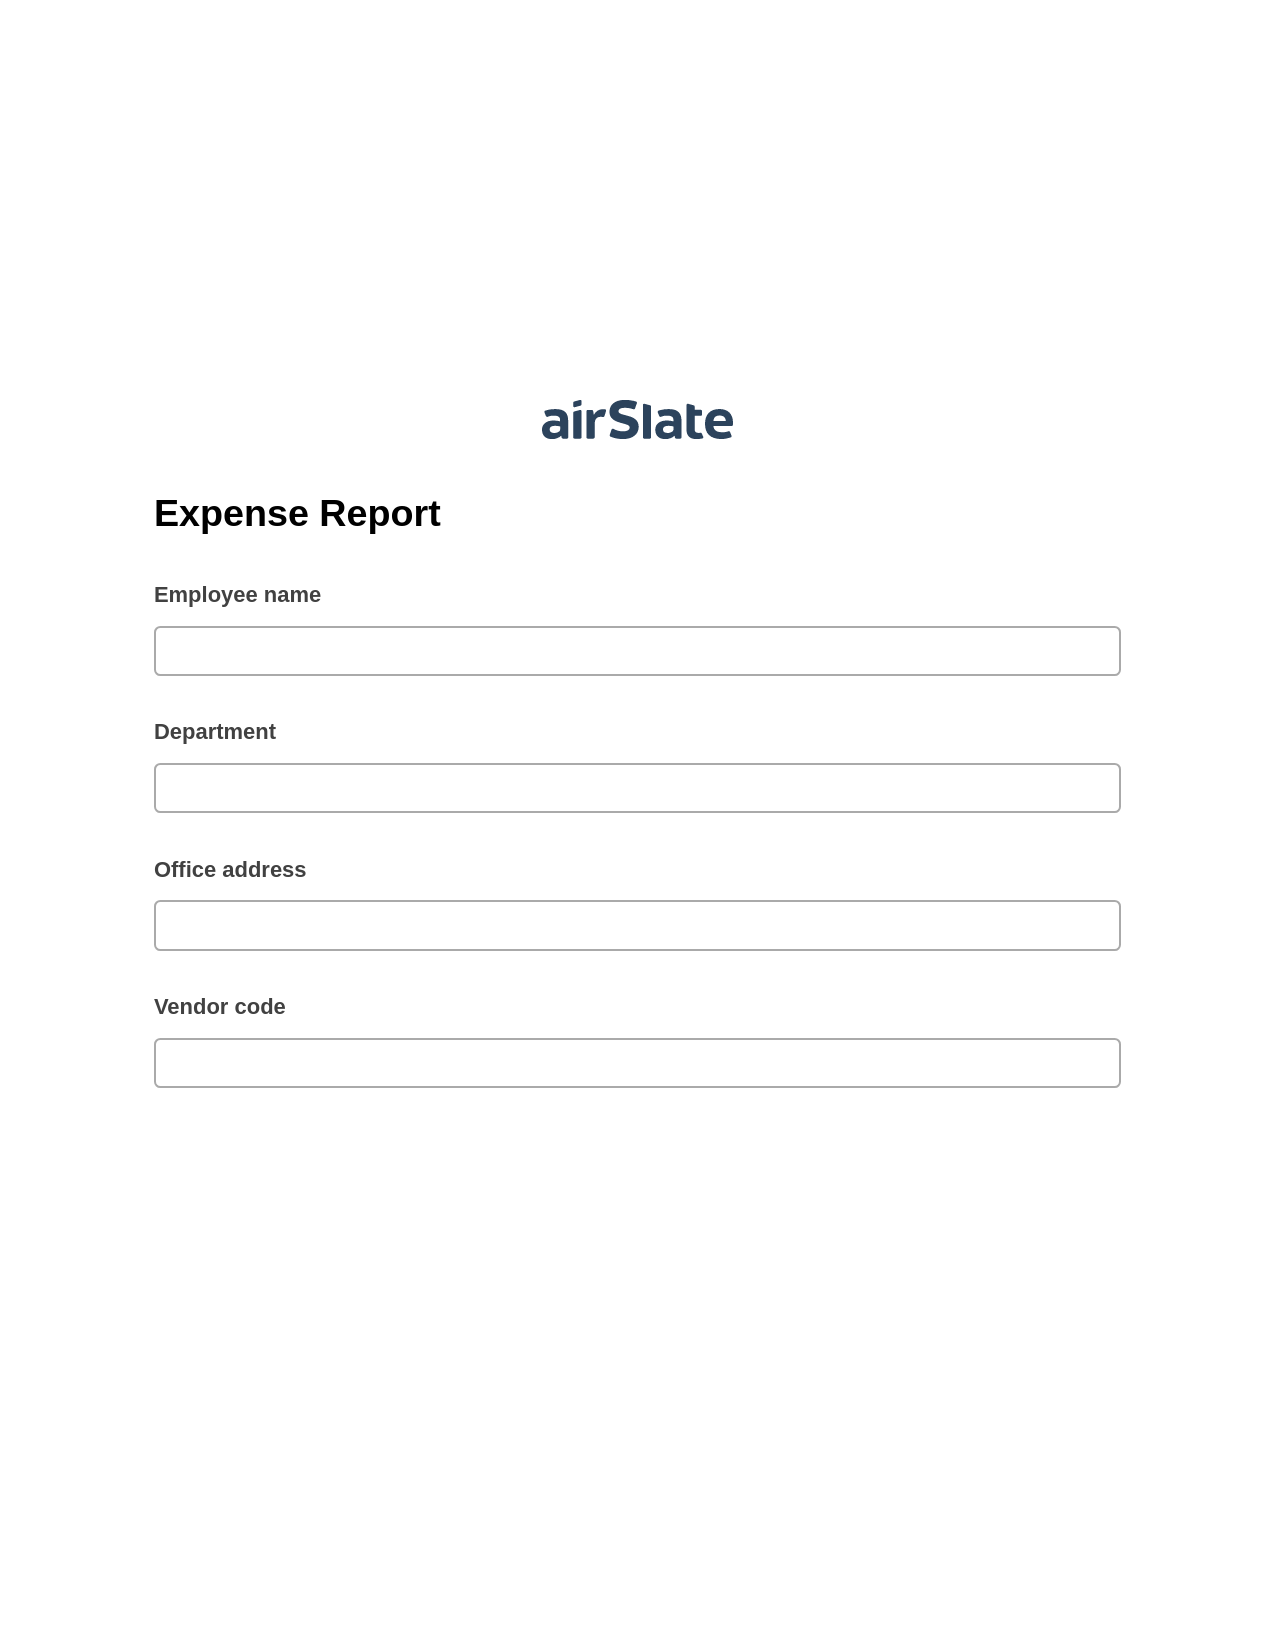 Multirole Expense Report Pre-fill from CSV File Bot, Document Hide Bot, Export to Excel 365 Bot